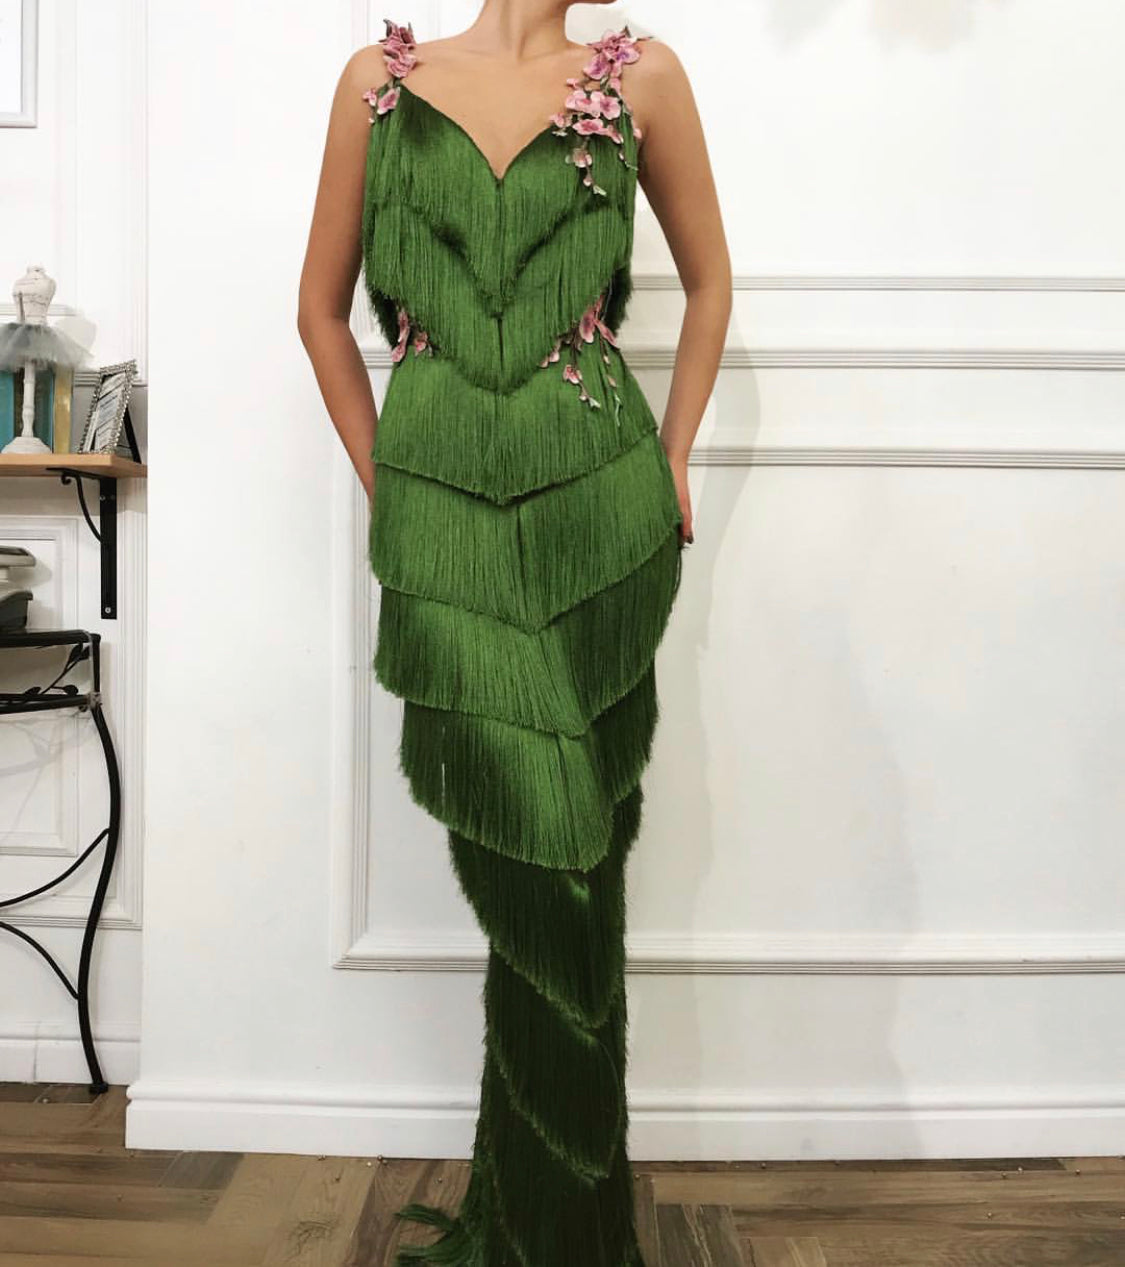 Green mermaid fringe dress with spaghetti straps, embroidery and v-neck